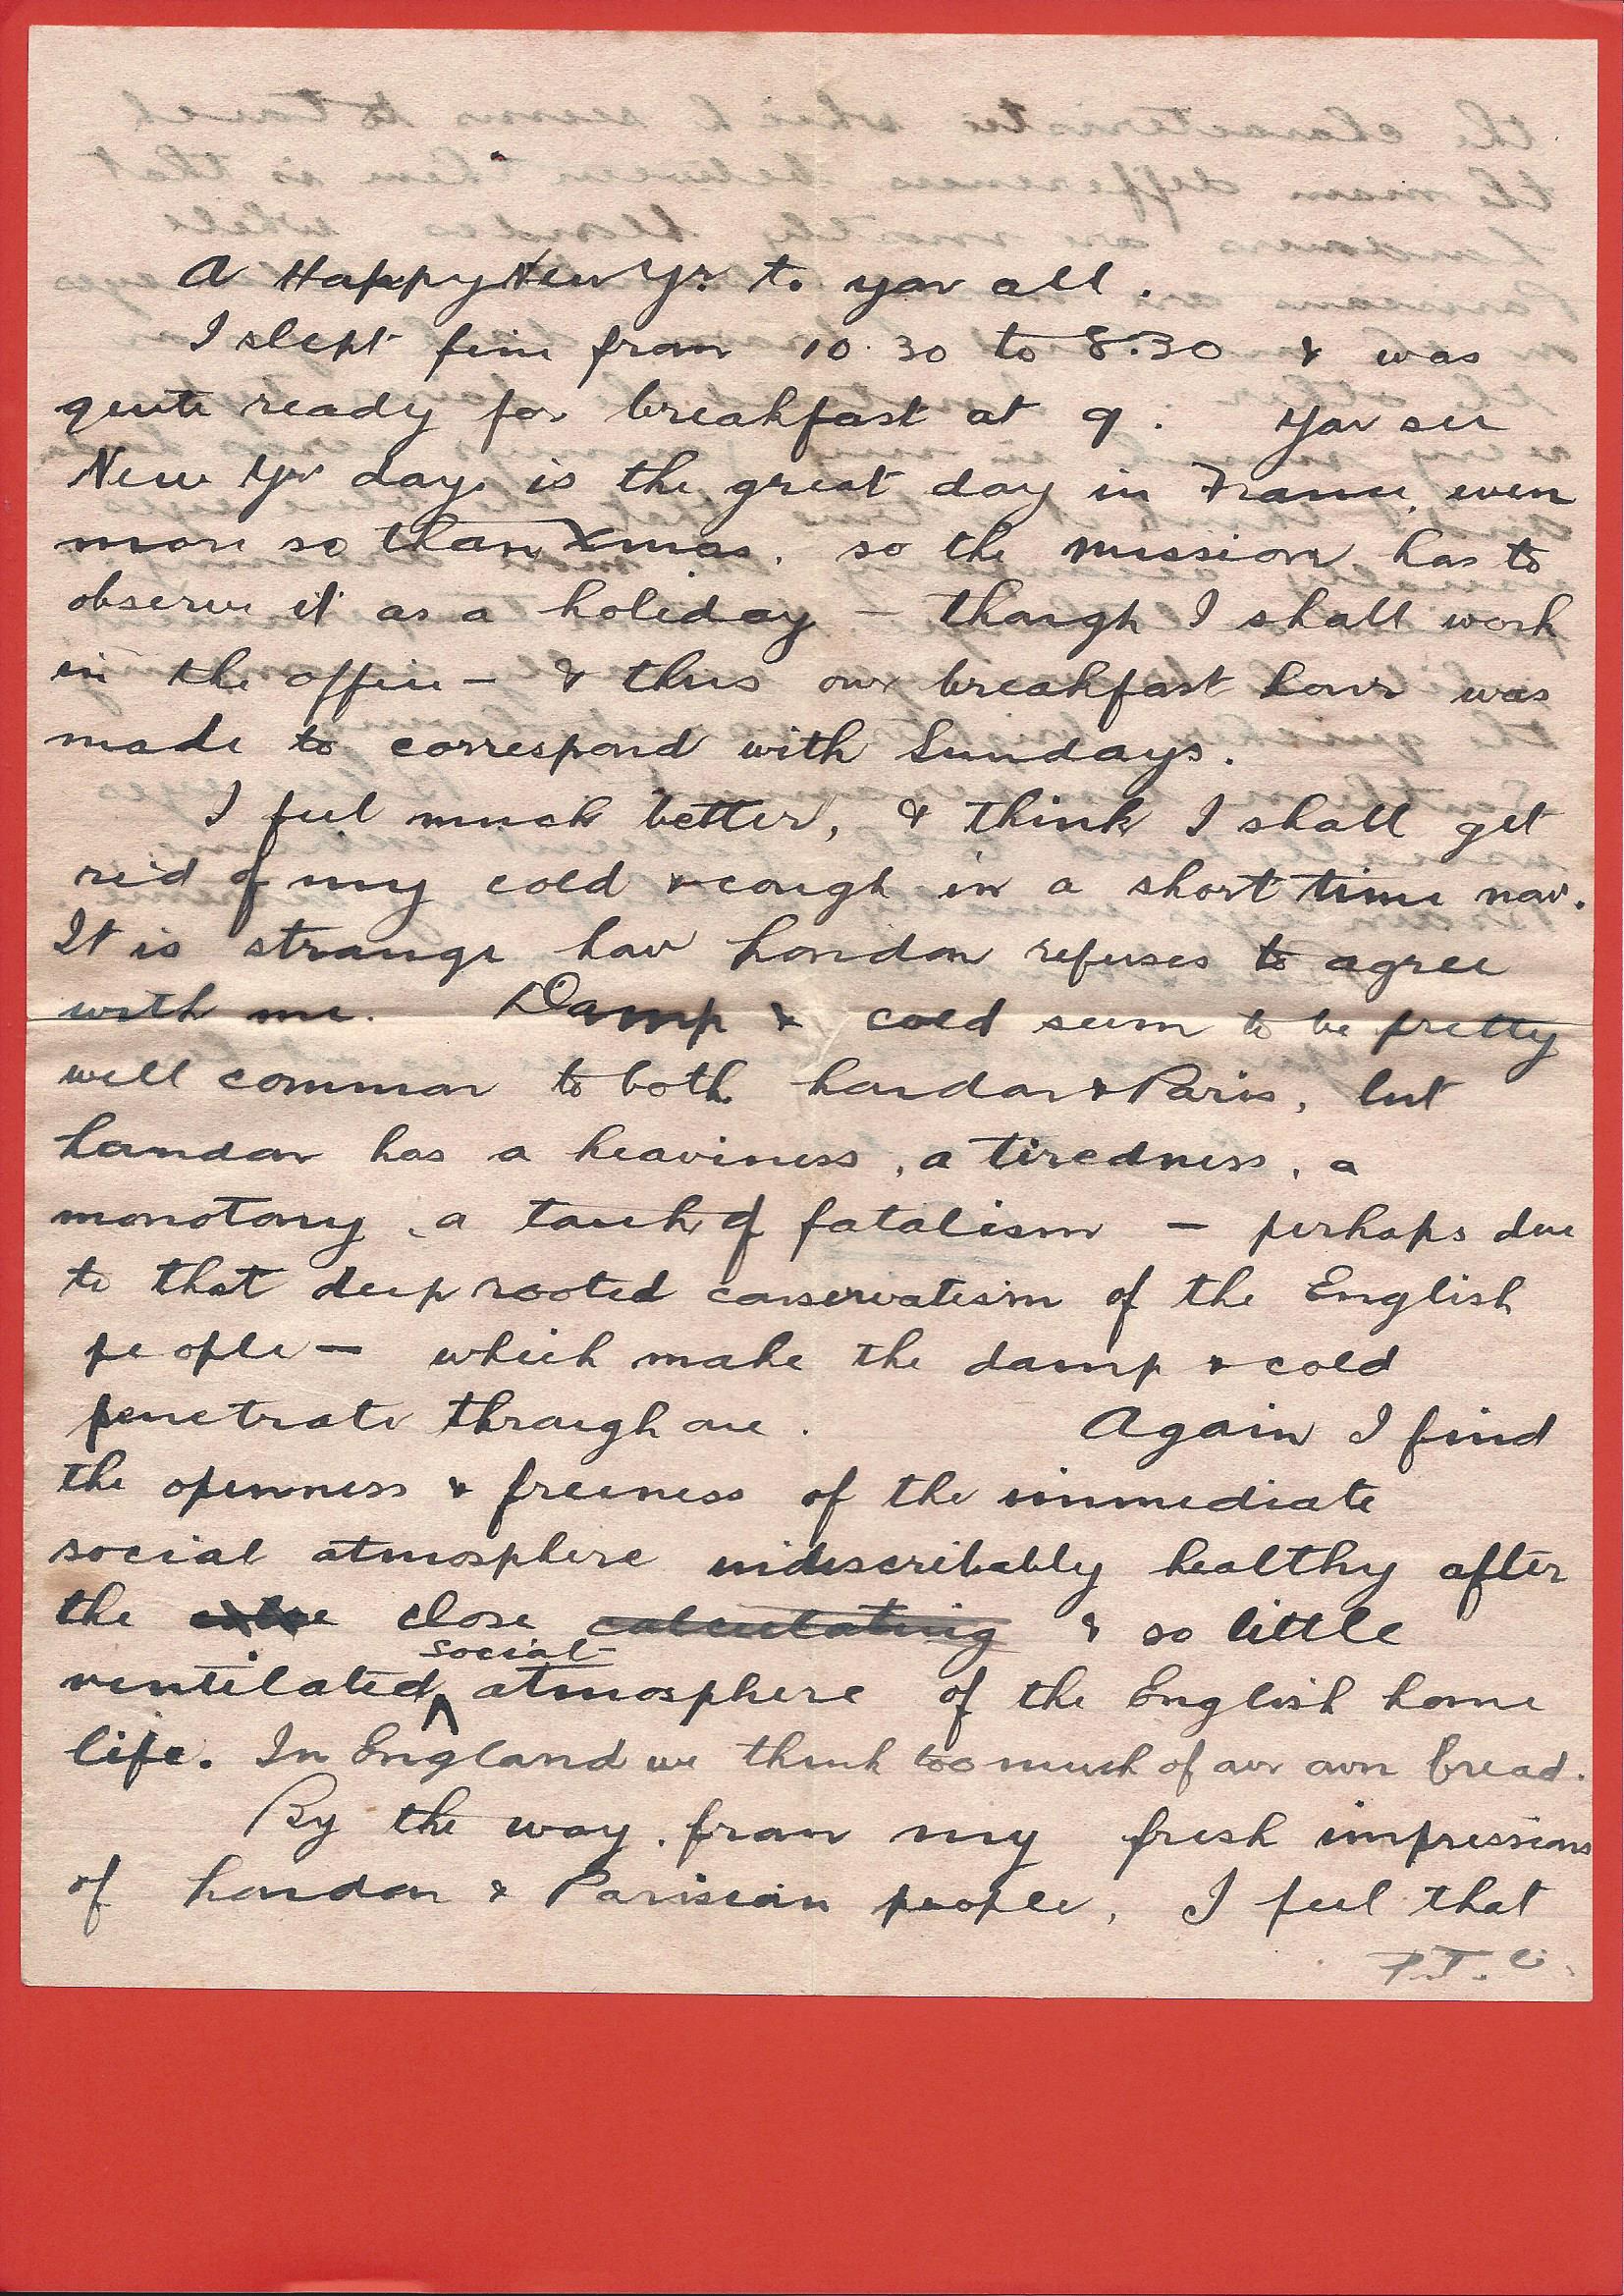 1919-12-31 page 3 letter by Donald Bearman